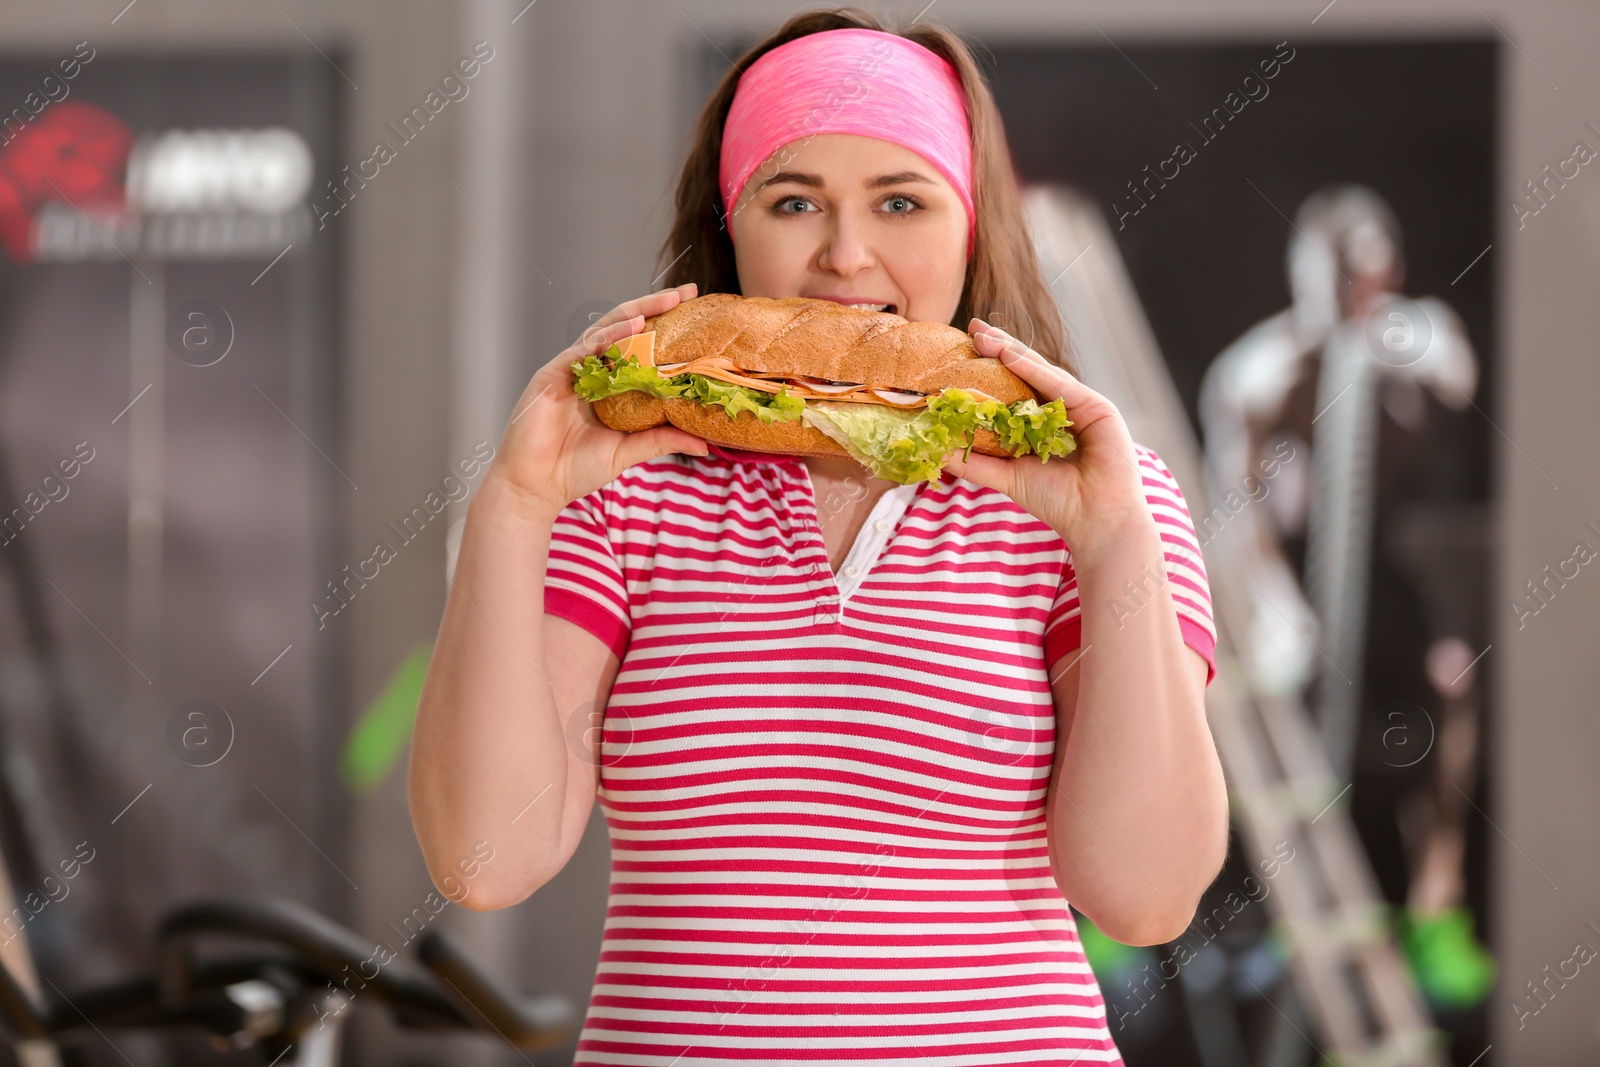 Photo of Overweight woman eating sandwich in gym